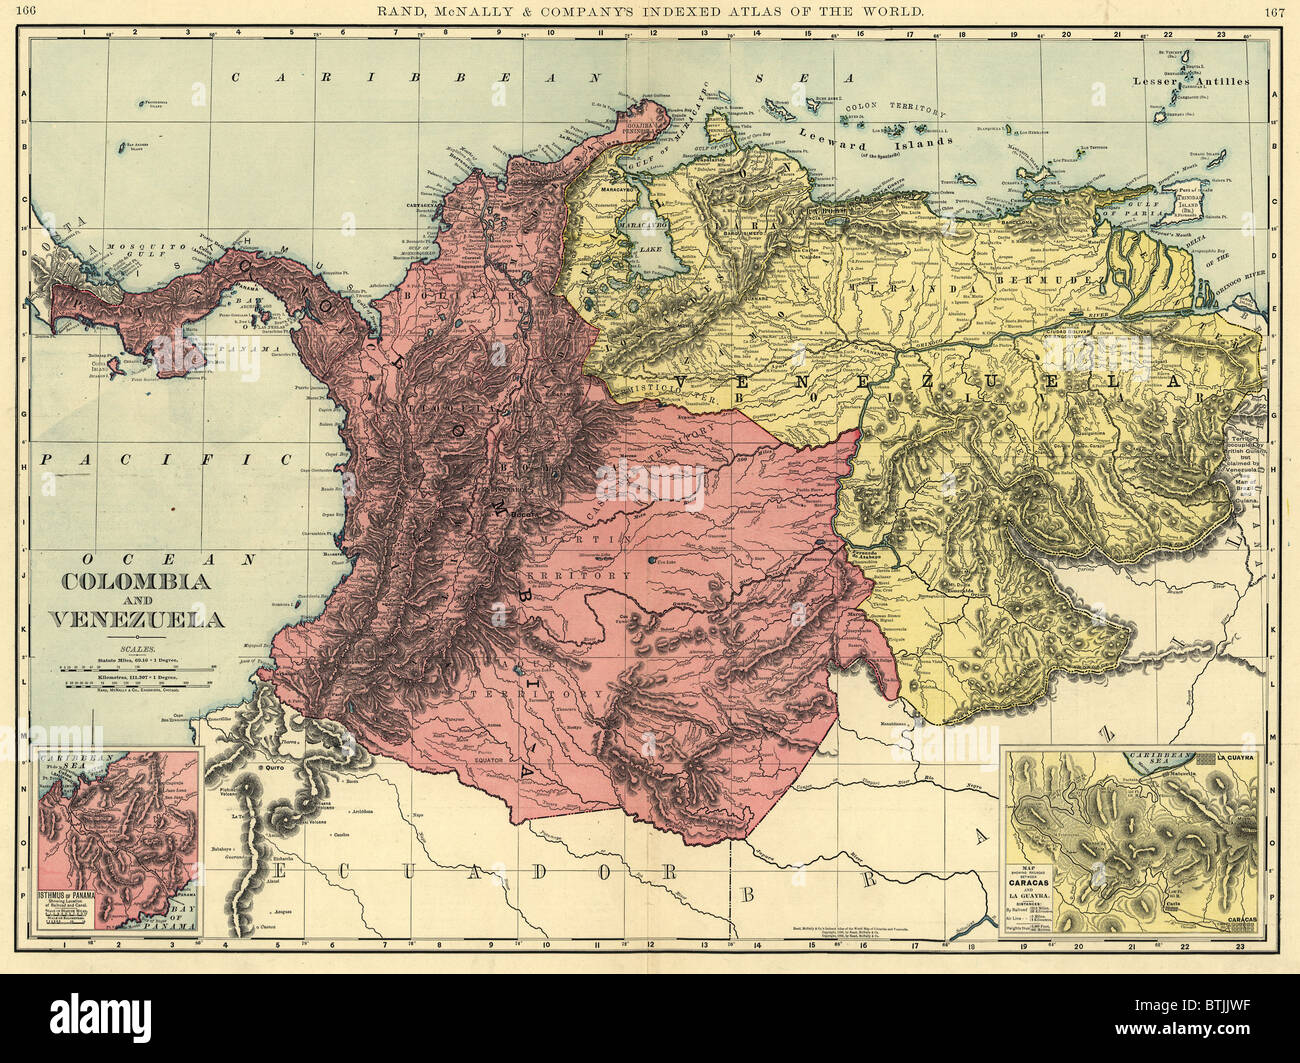 Map of Colombia and Venezuela, ca. 1898 Stock Photo